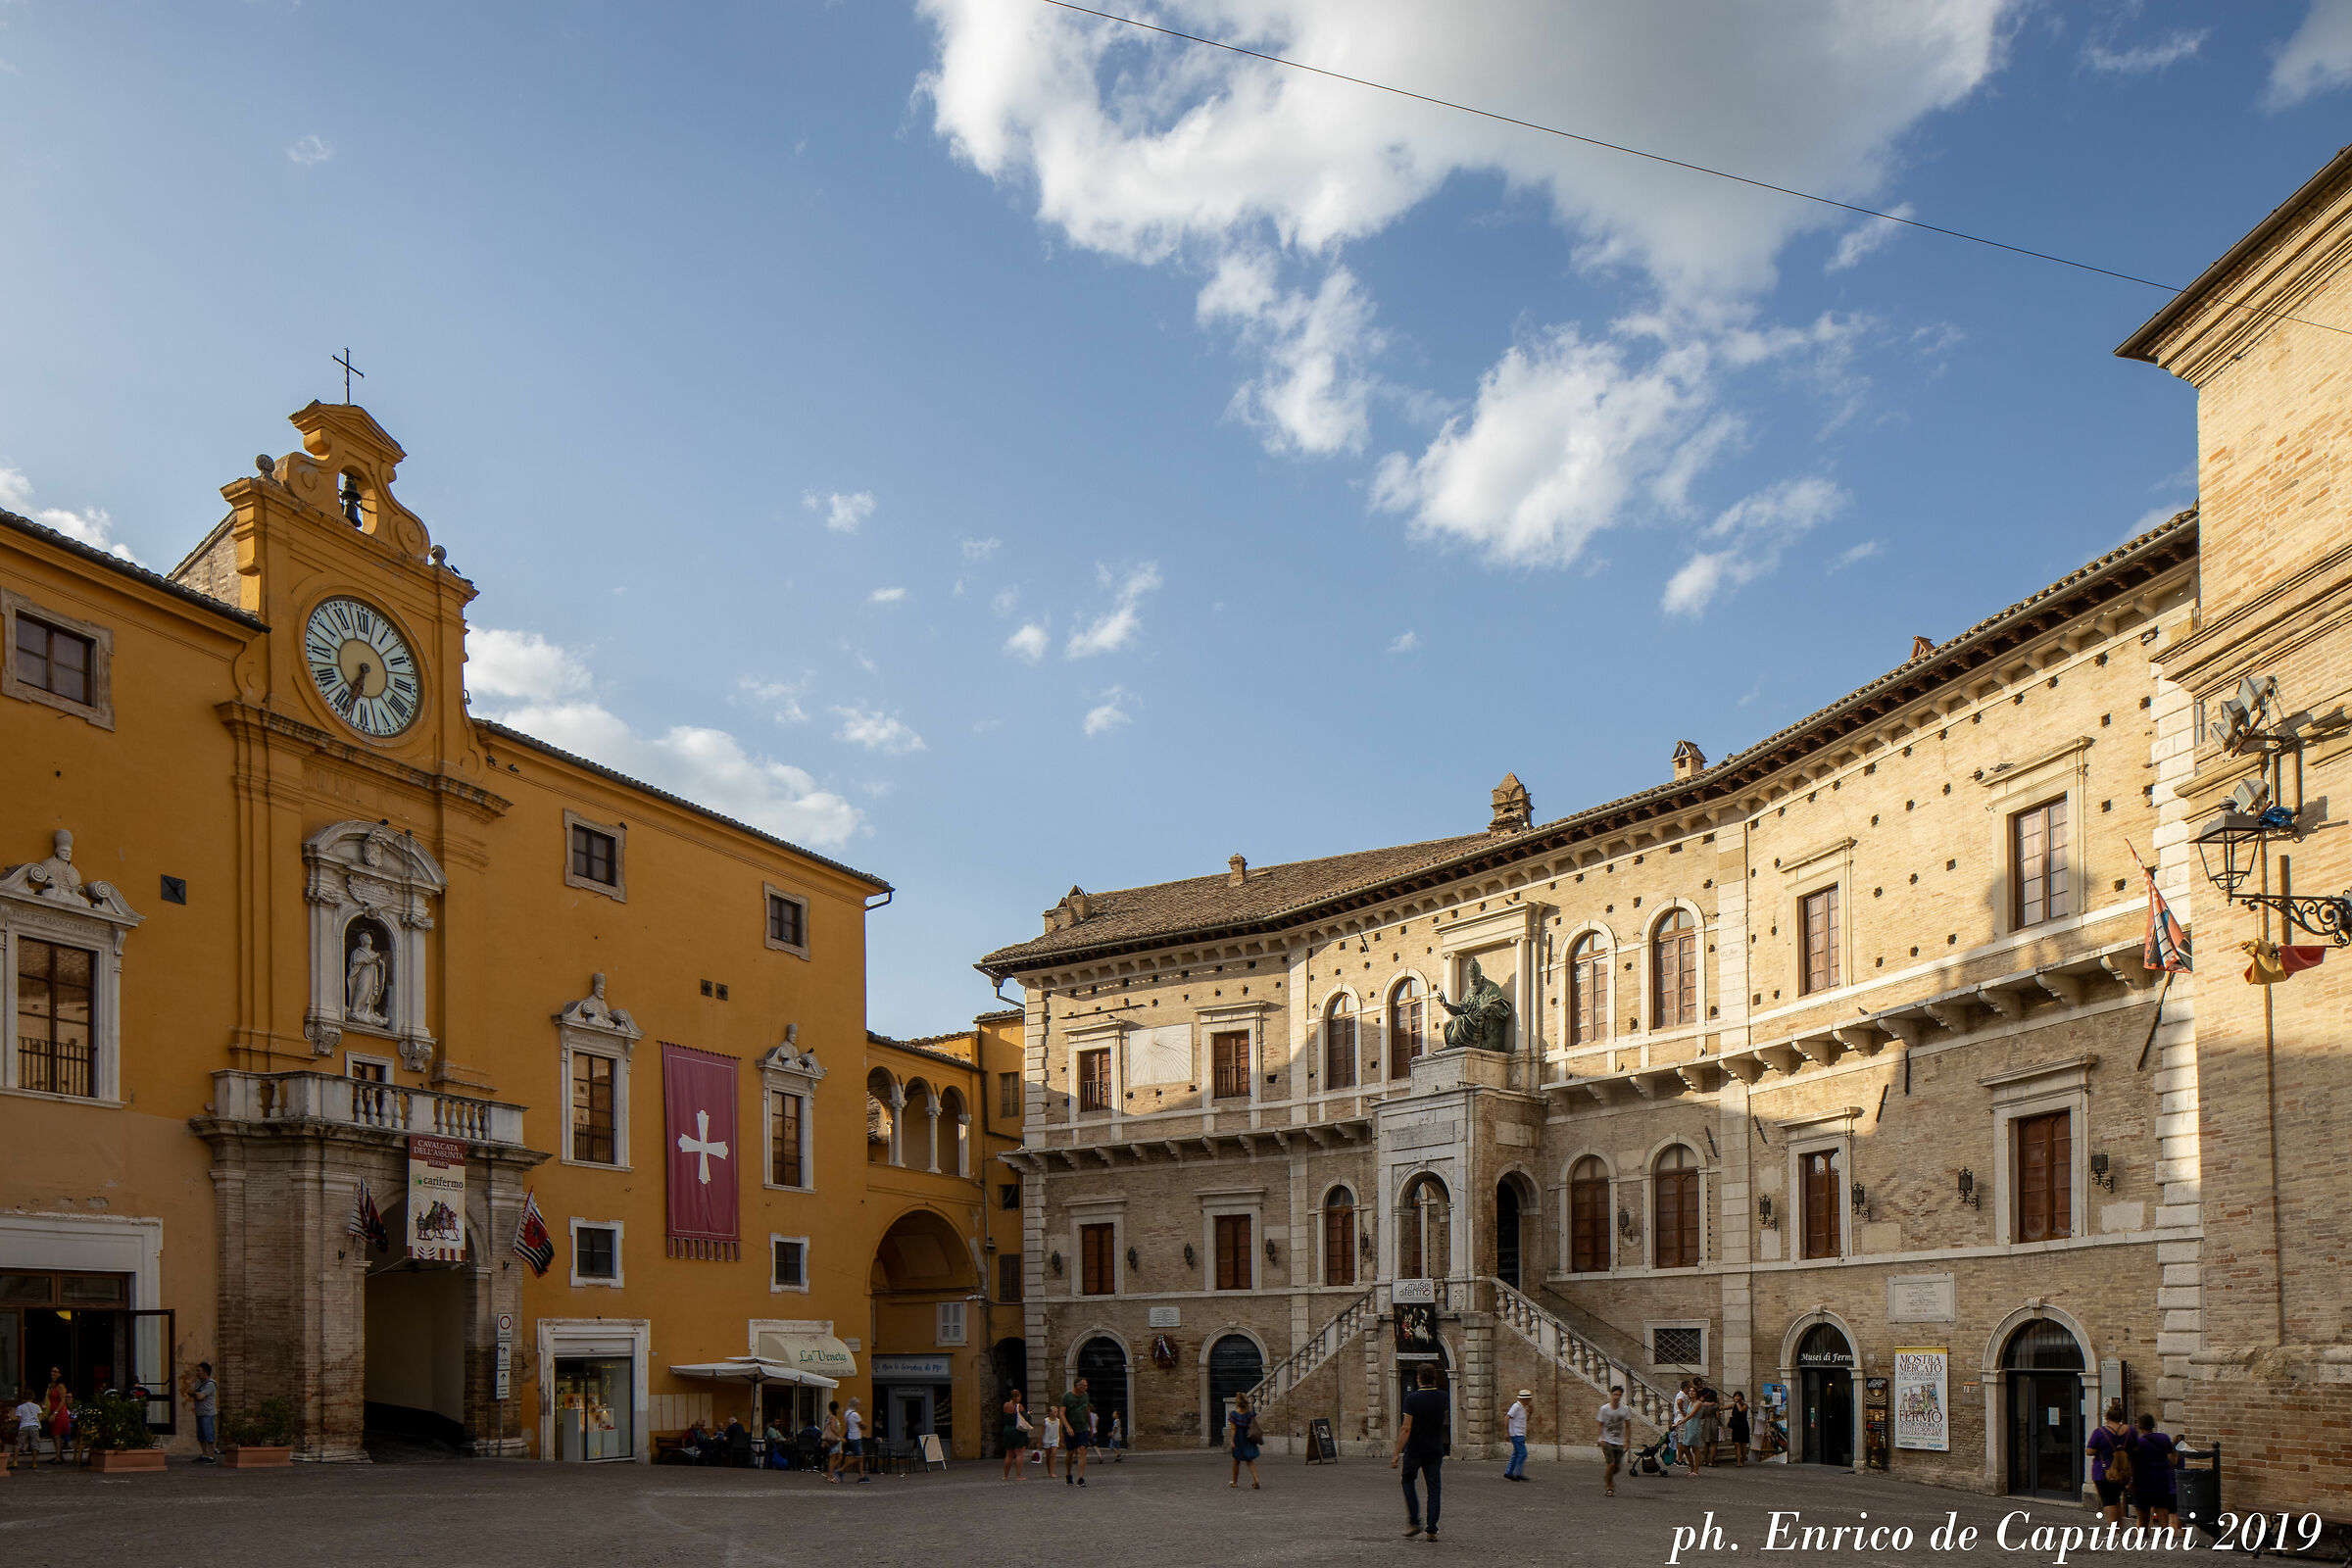 People's Square in Fermo...